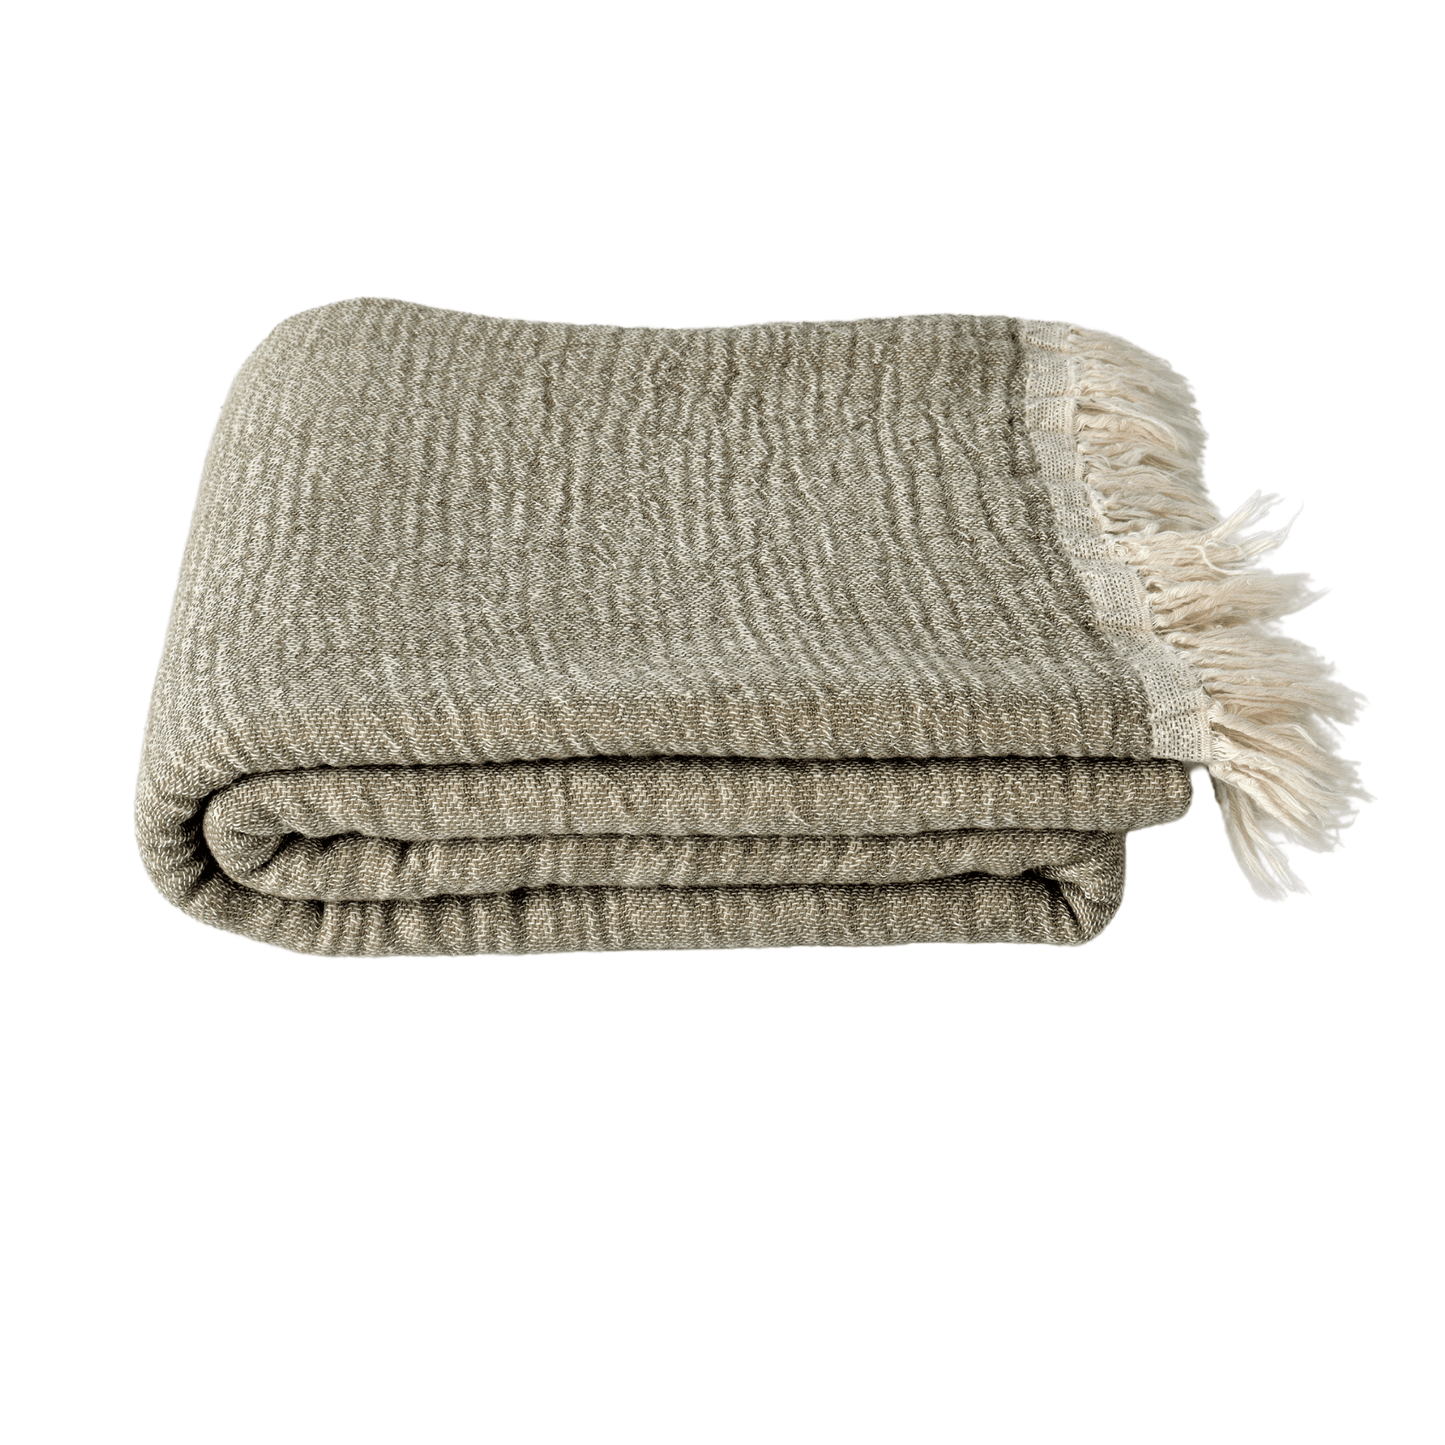 Muslin Towels for Adults khakie green